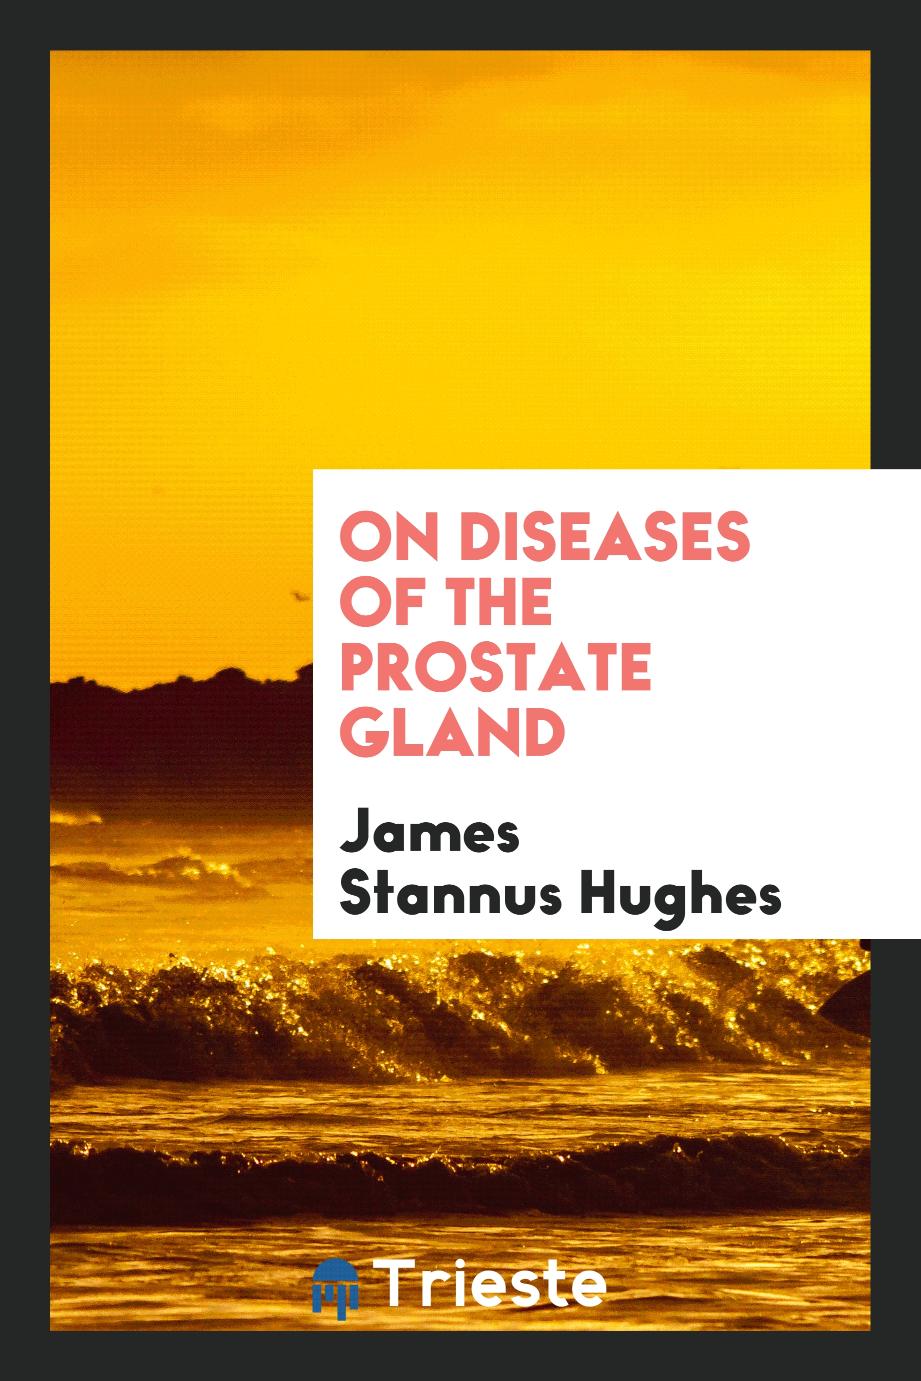 On diseases of the prostate gland